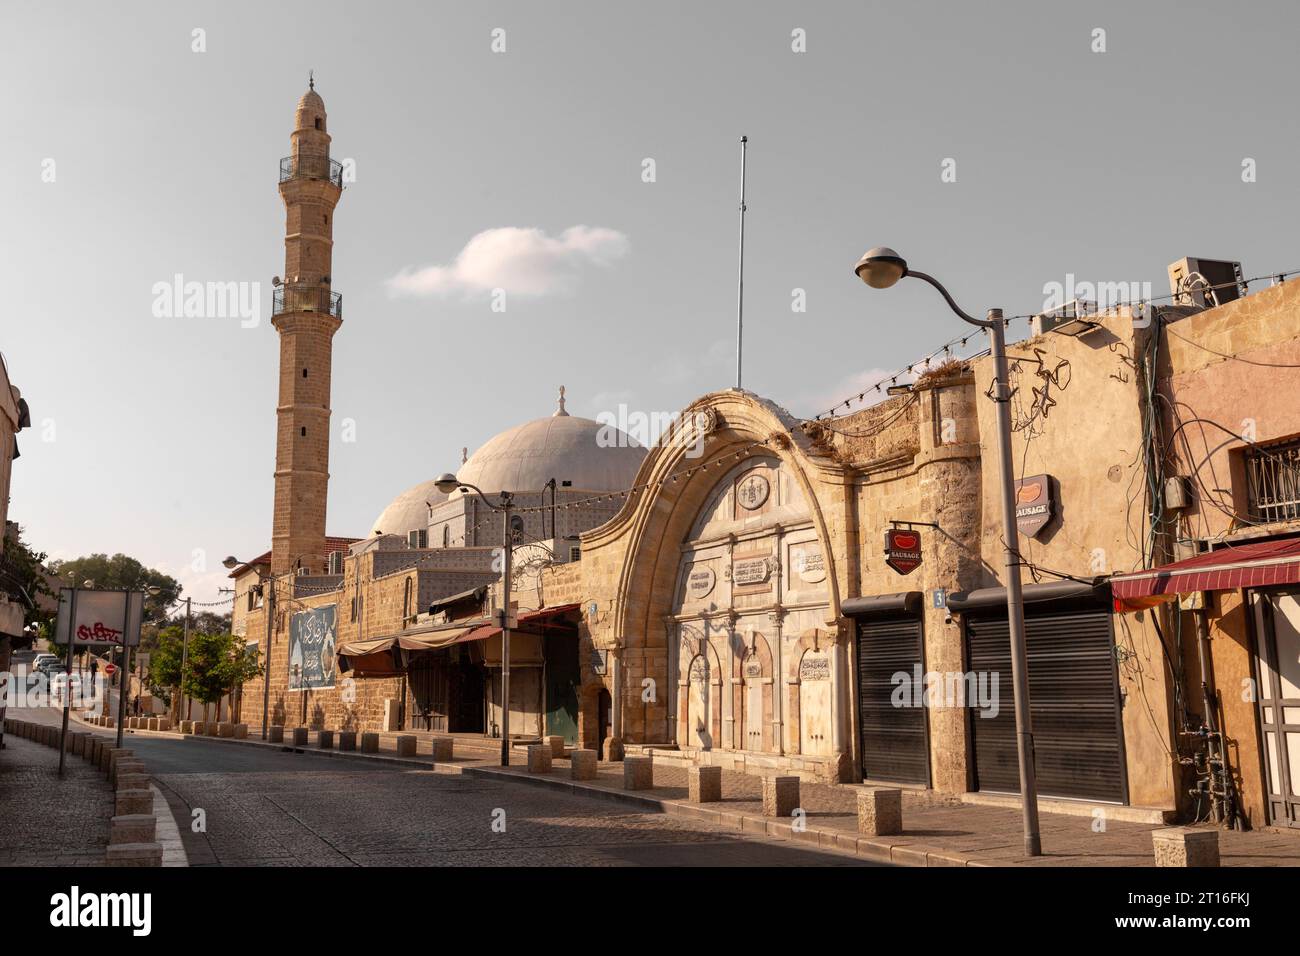 Jaffa, Israel - October 10, 2023: The Mahmoudiya Mosque is the largest and most significant mosque in Jaffa, now part of the larger city of Tel Aviv-Y Stock Photo